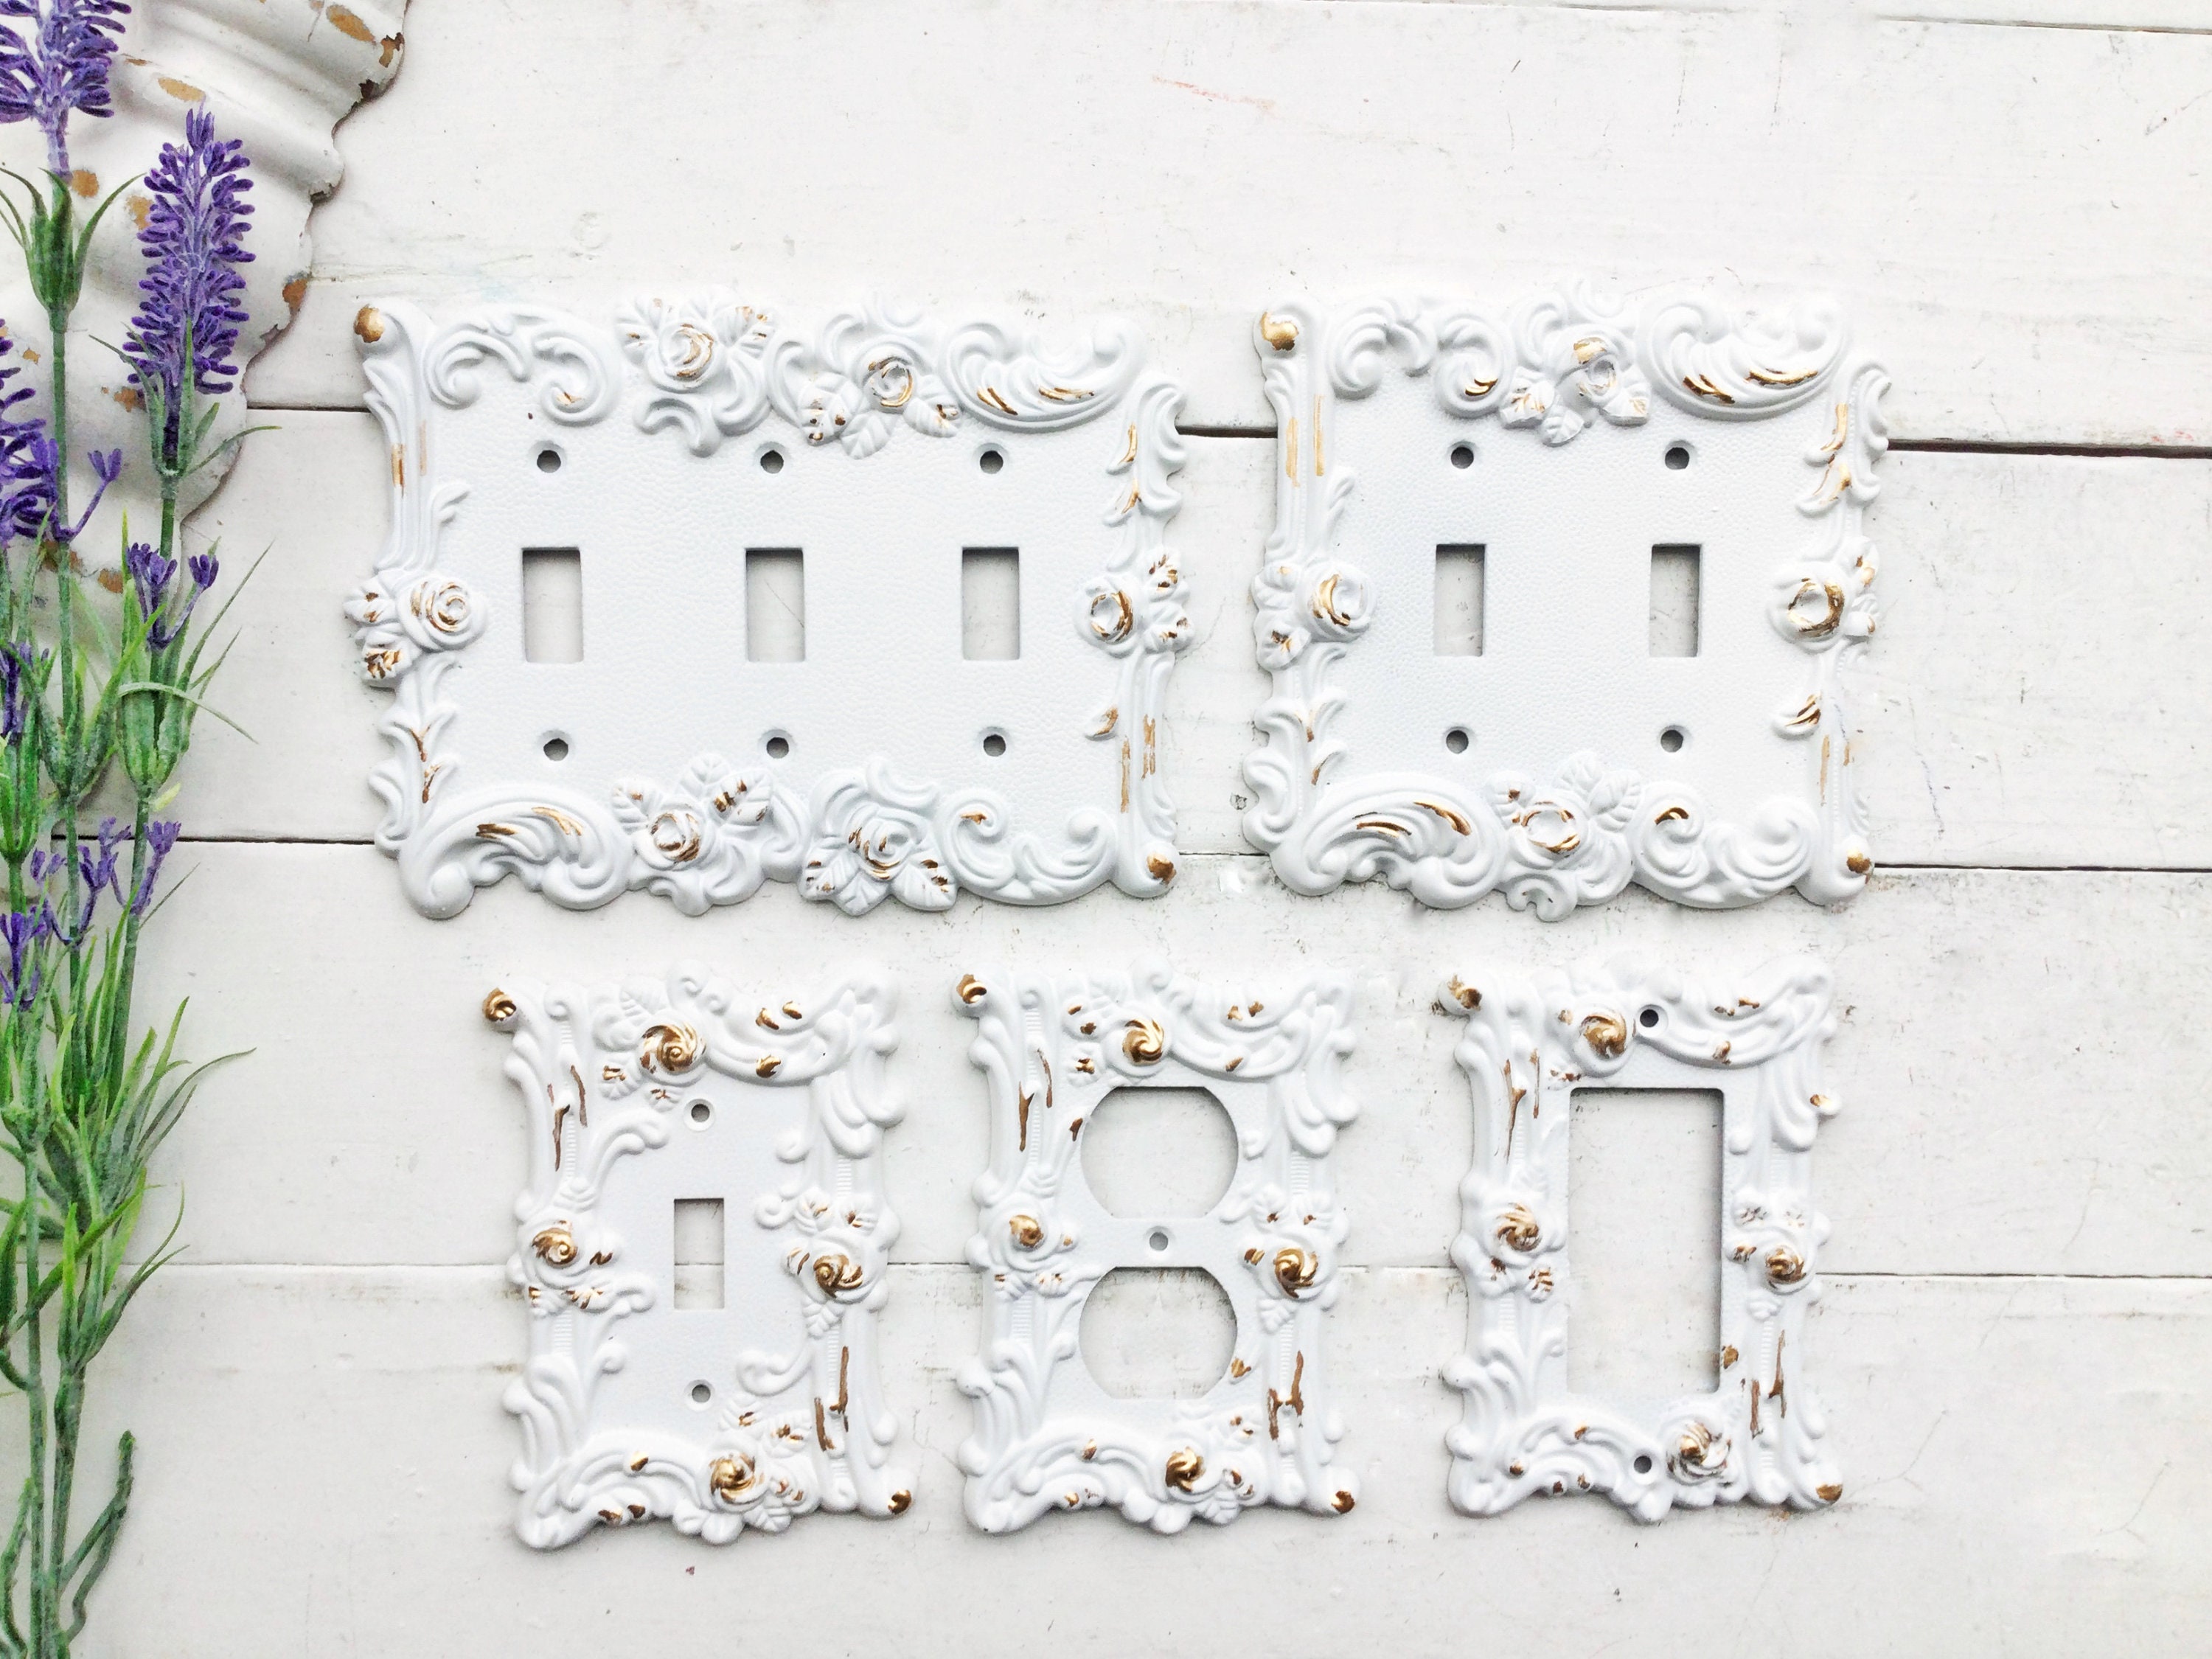 In Shabby White Lightswitch Cover Light Switch Cover Switch Cover Light Switch Cover Plates,Shabby Chic Custom Light Switch Cover